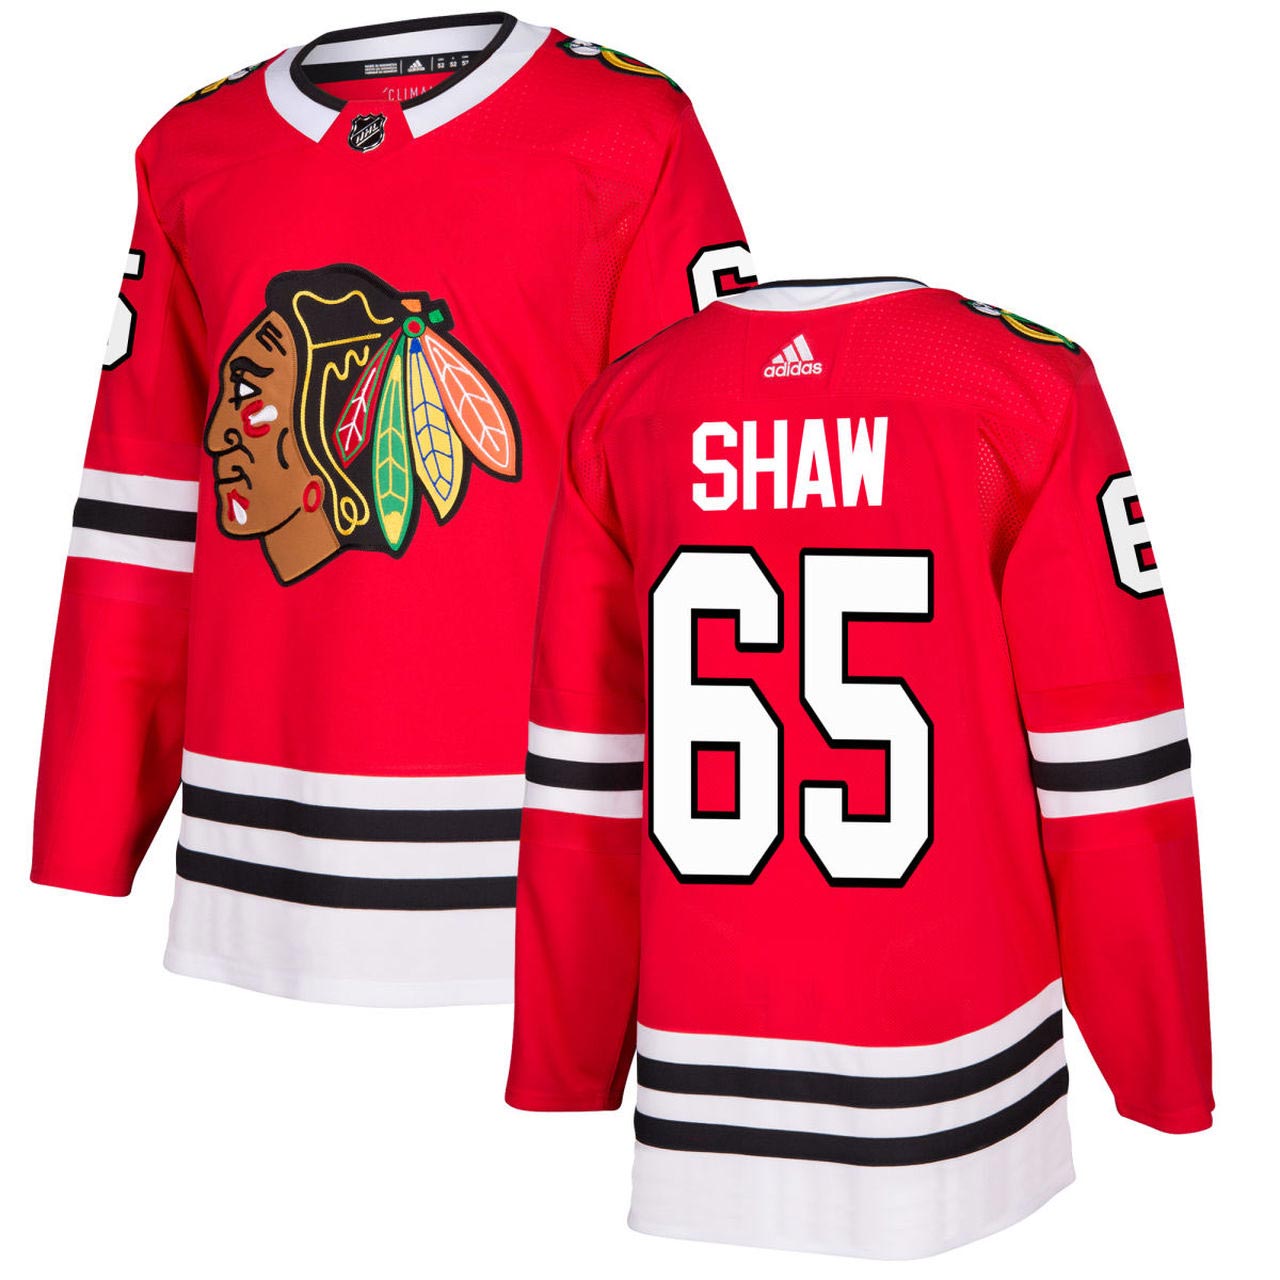 ANDREW SHAW - Home